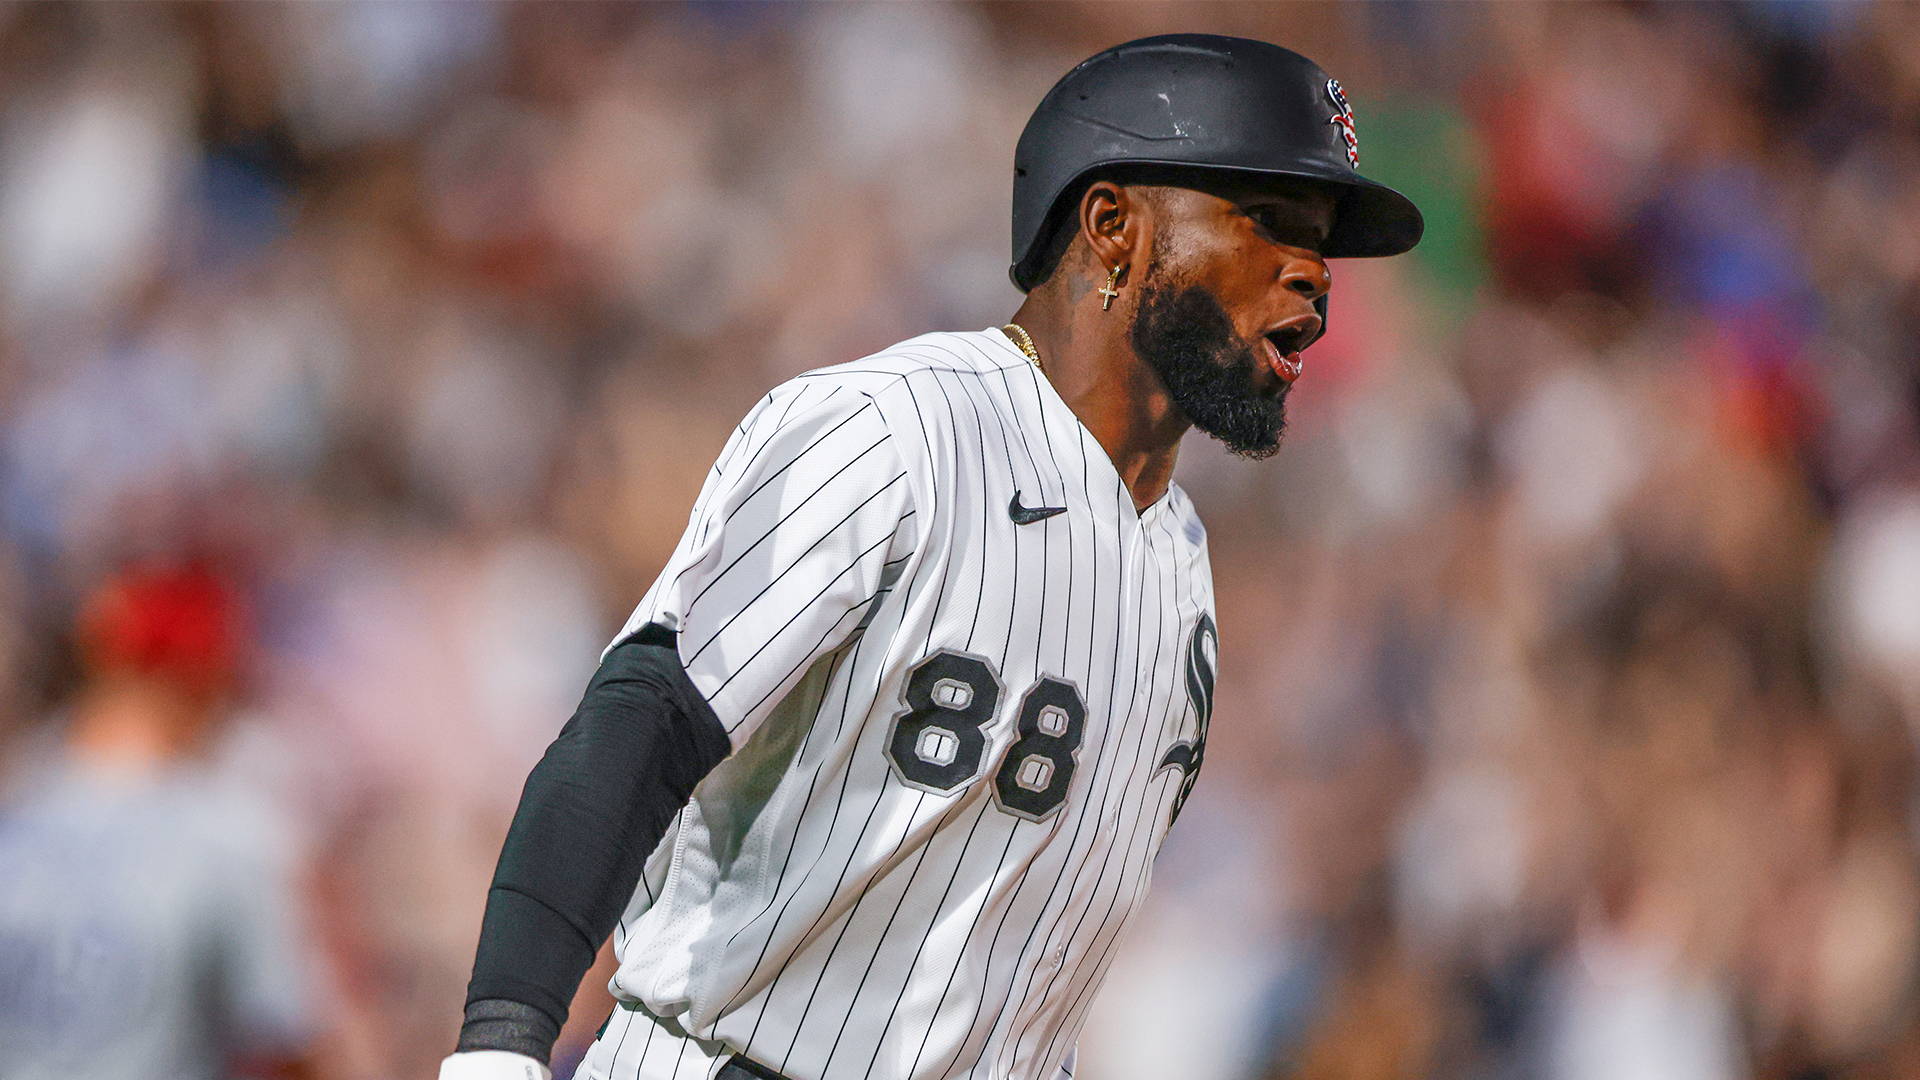 Luis Robert Jr. is a star for White Sox